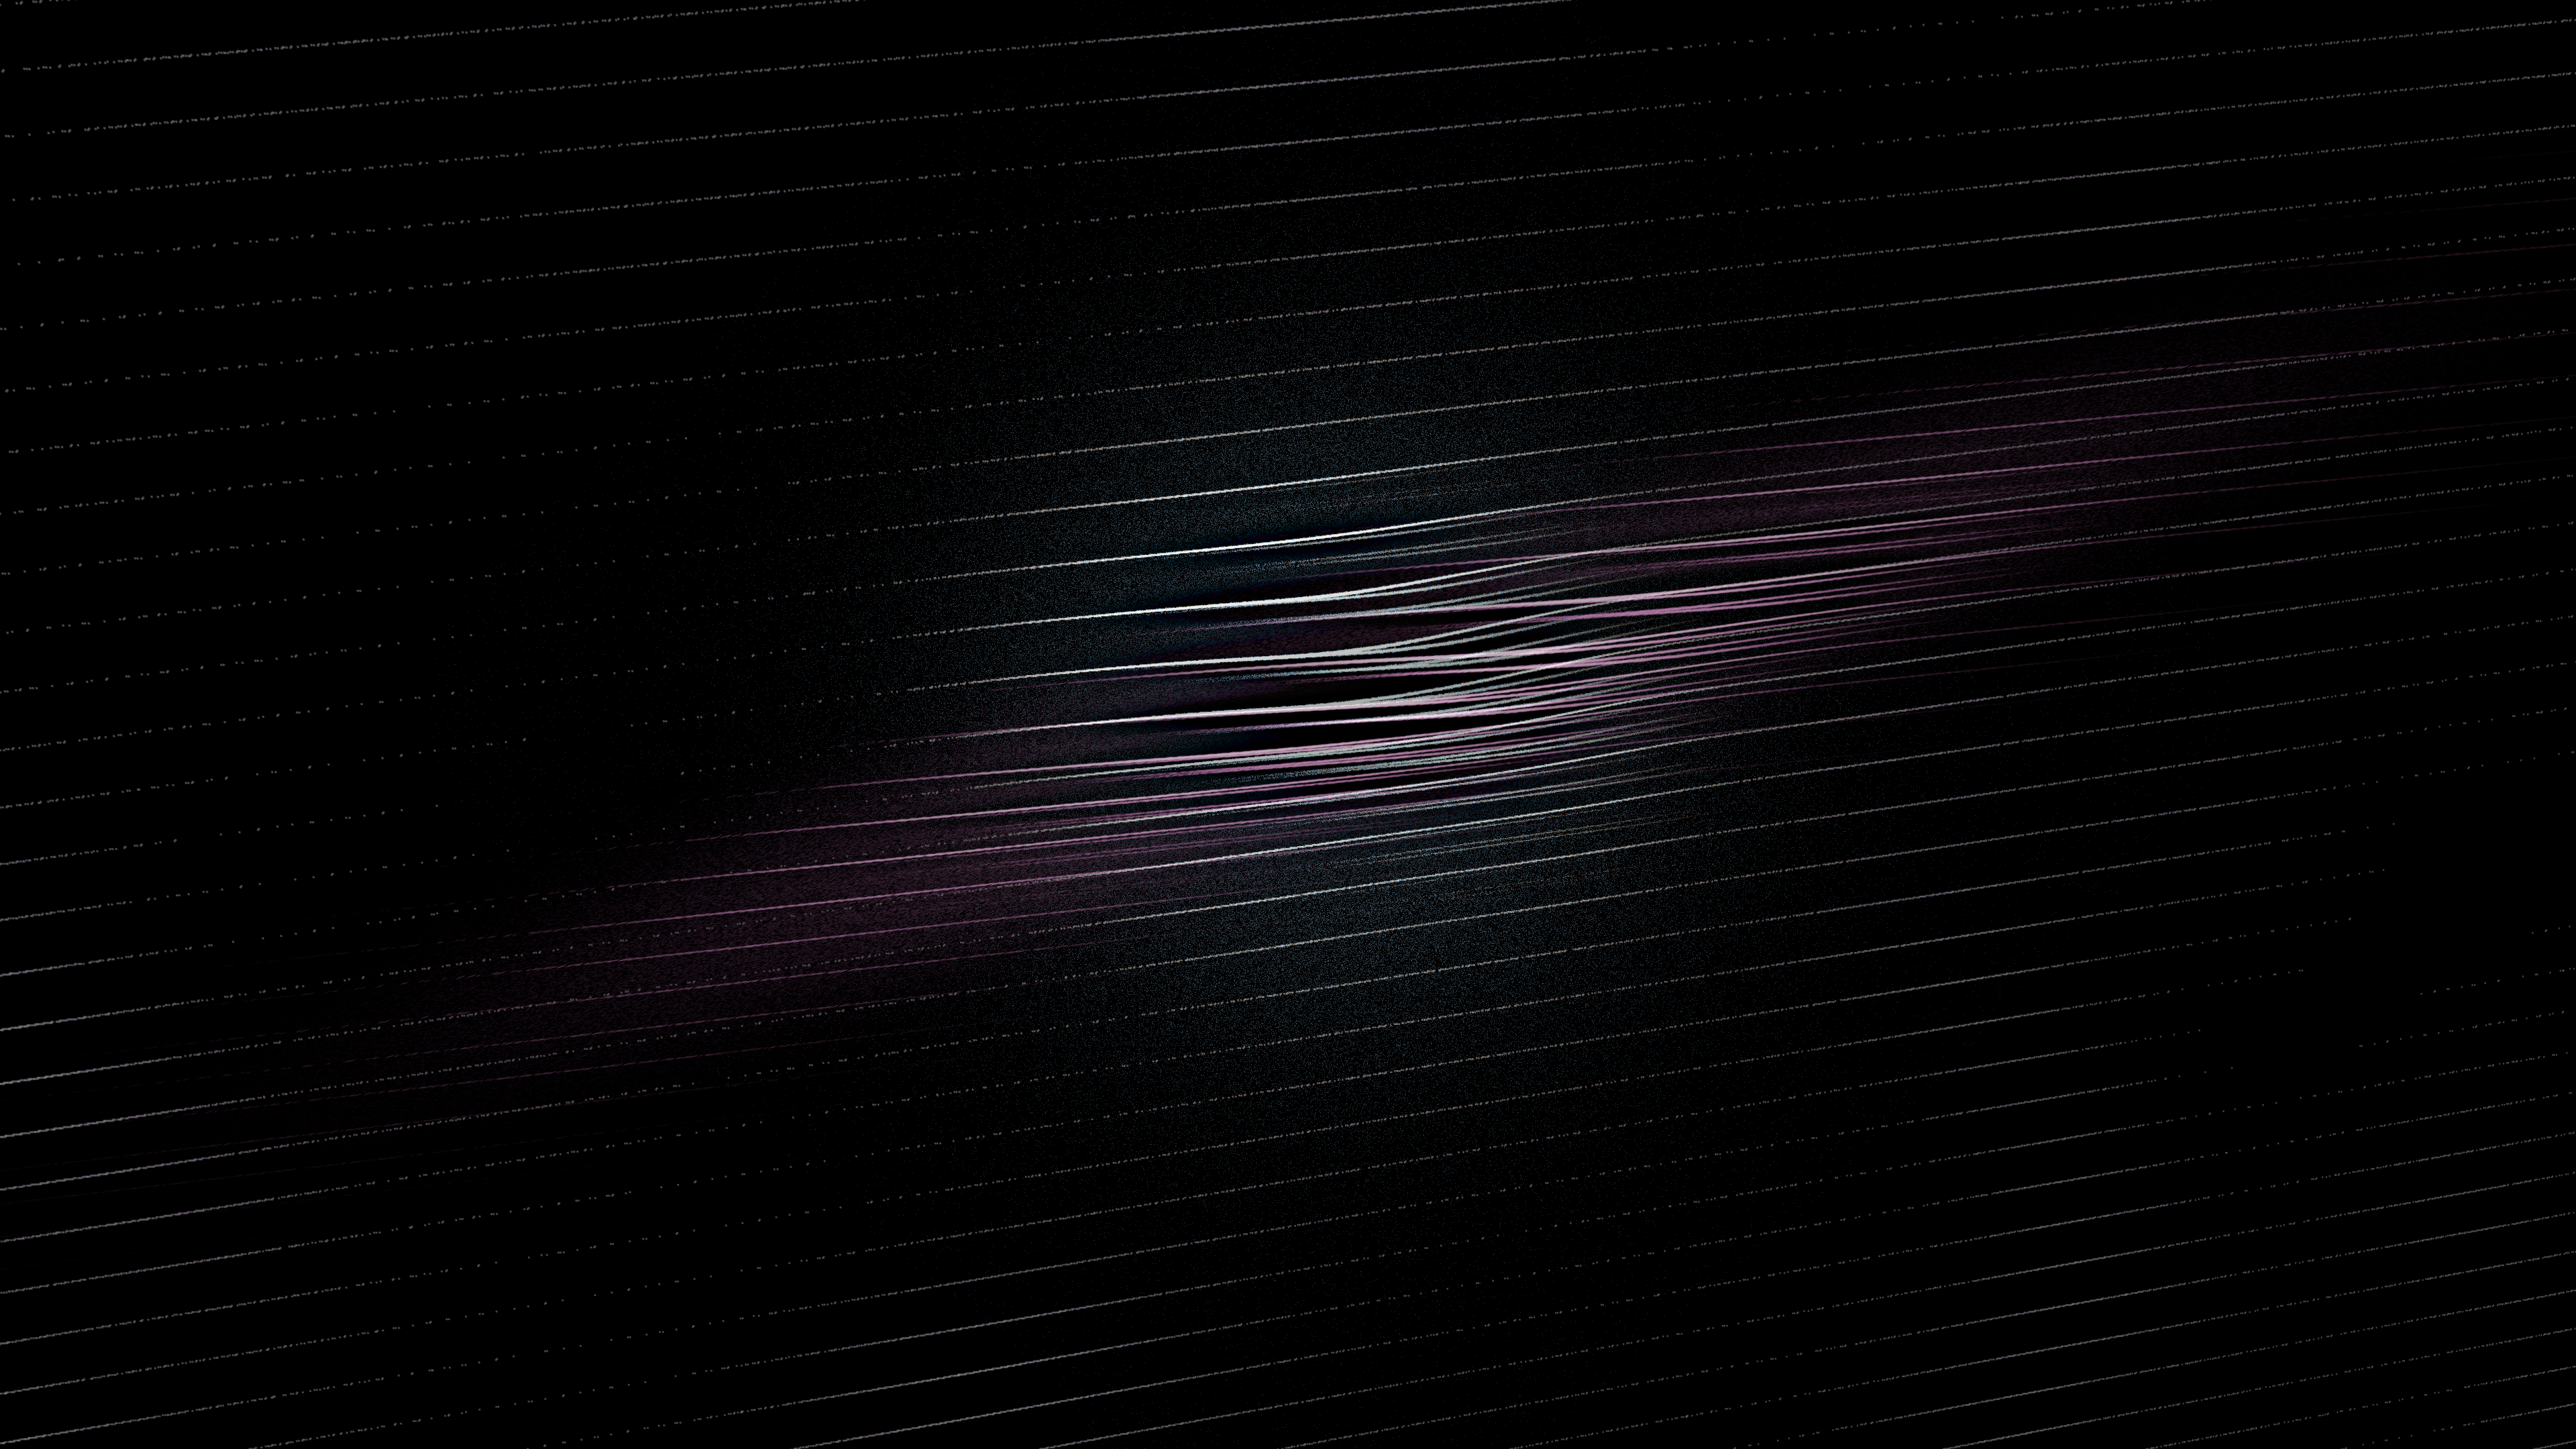 Line Art Abstract Dark Background 3D Abstract 3840x2160